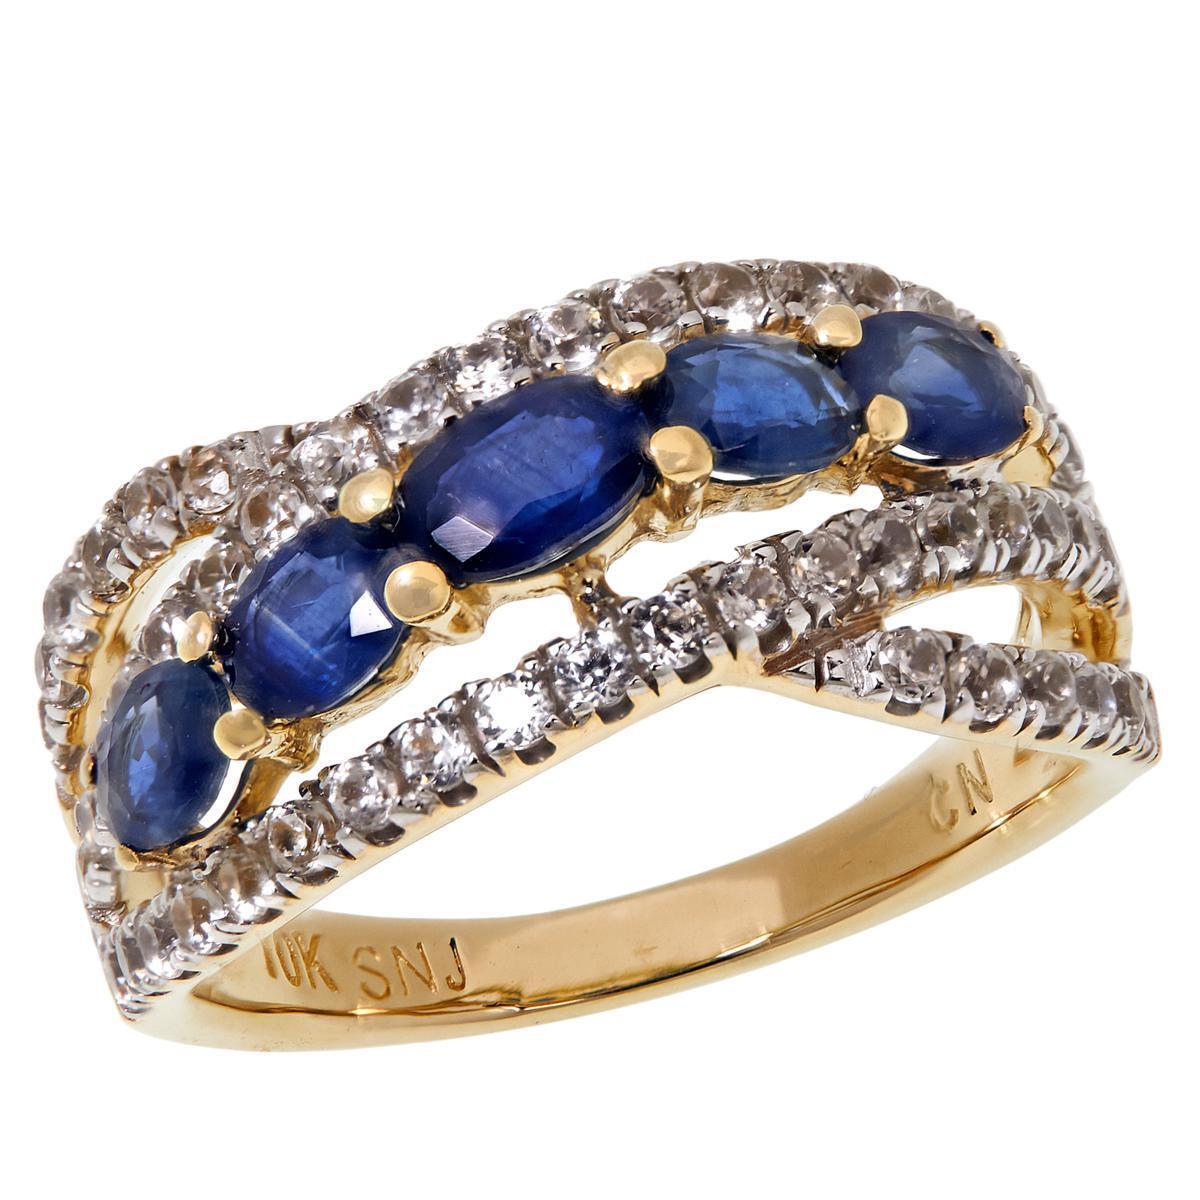 Colleen Lopez 10K Gold Genuine Sapphire and White Zircon Ring. Size 5